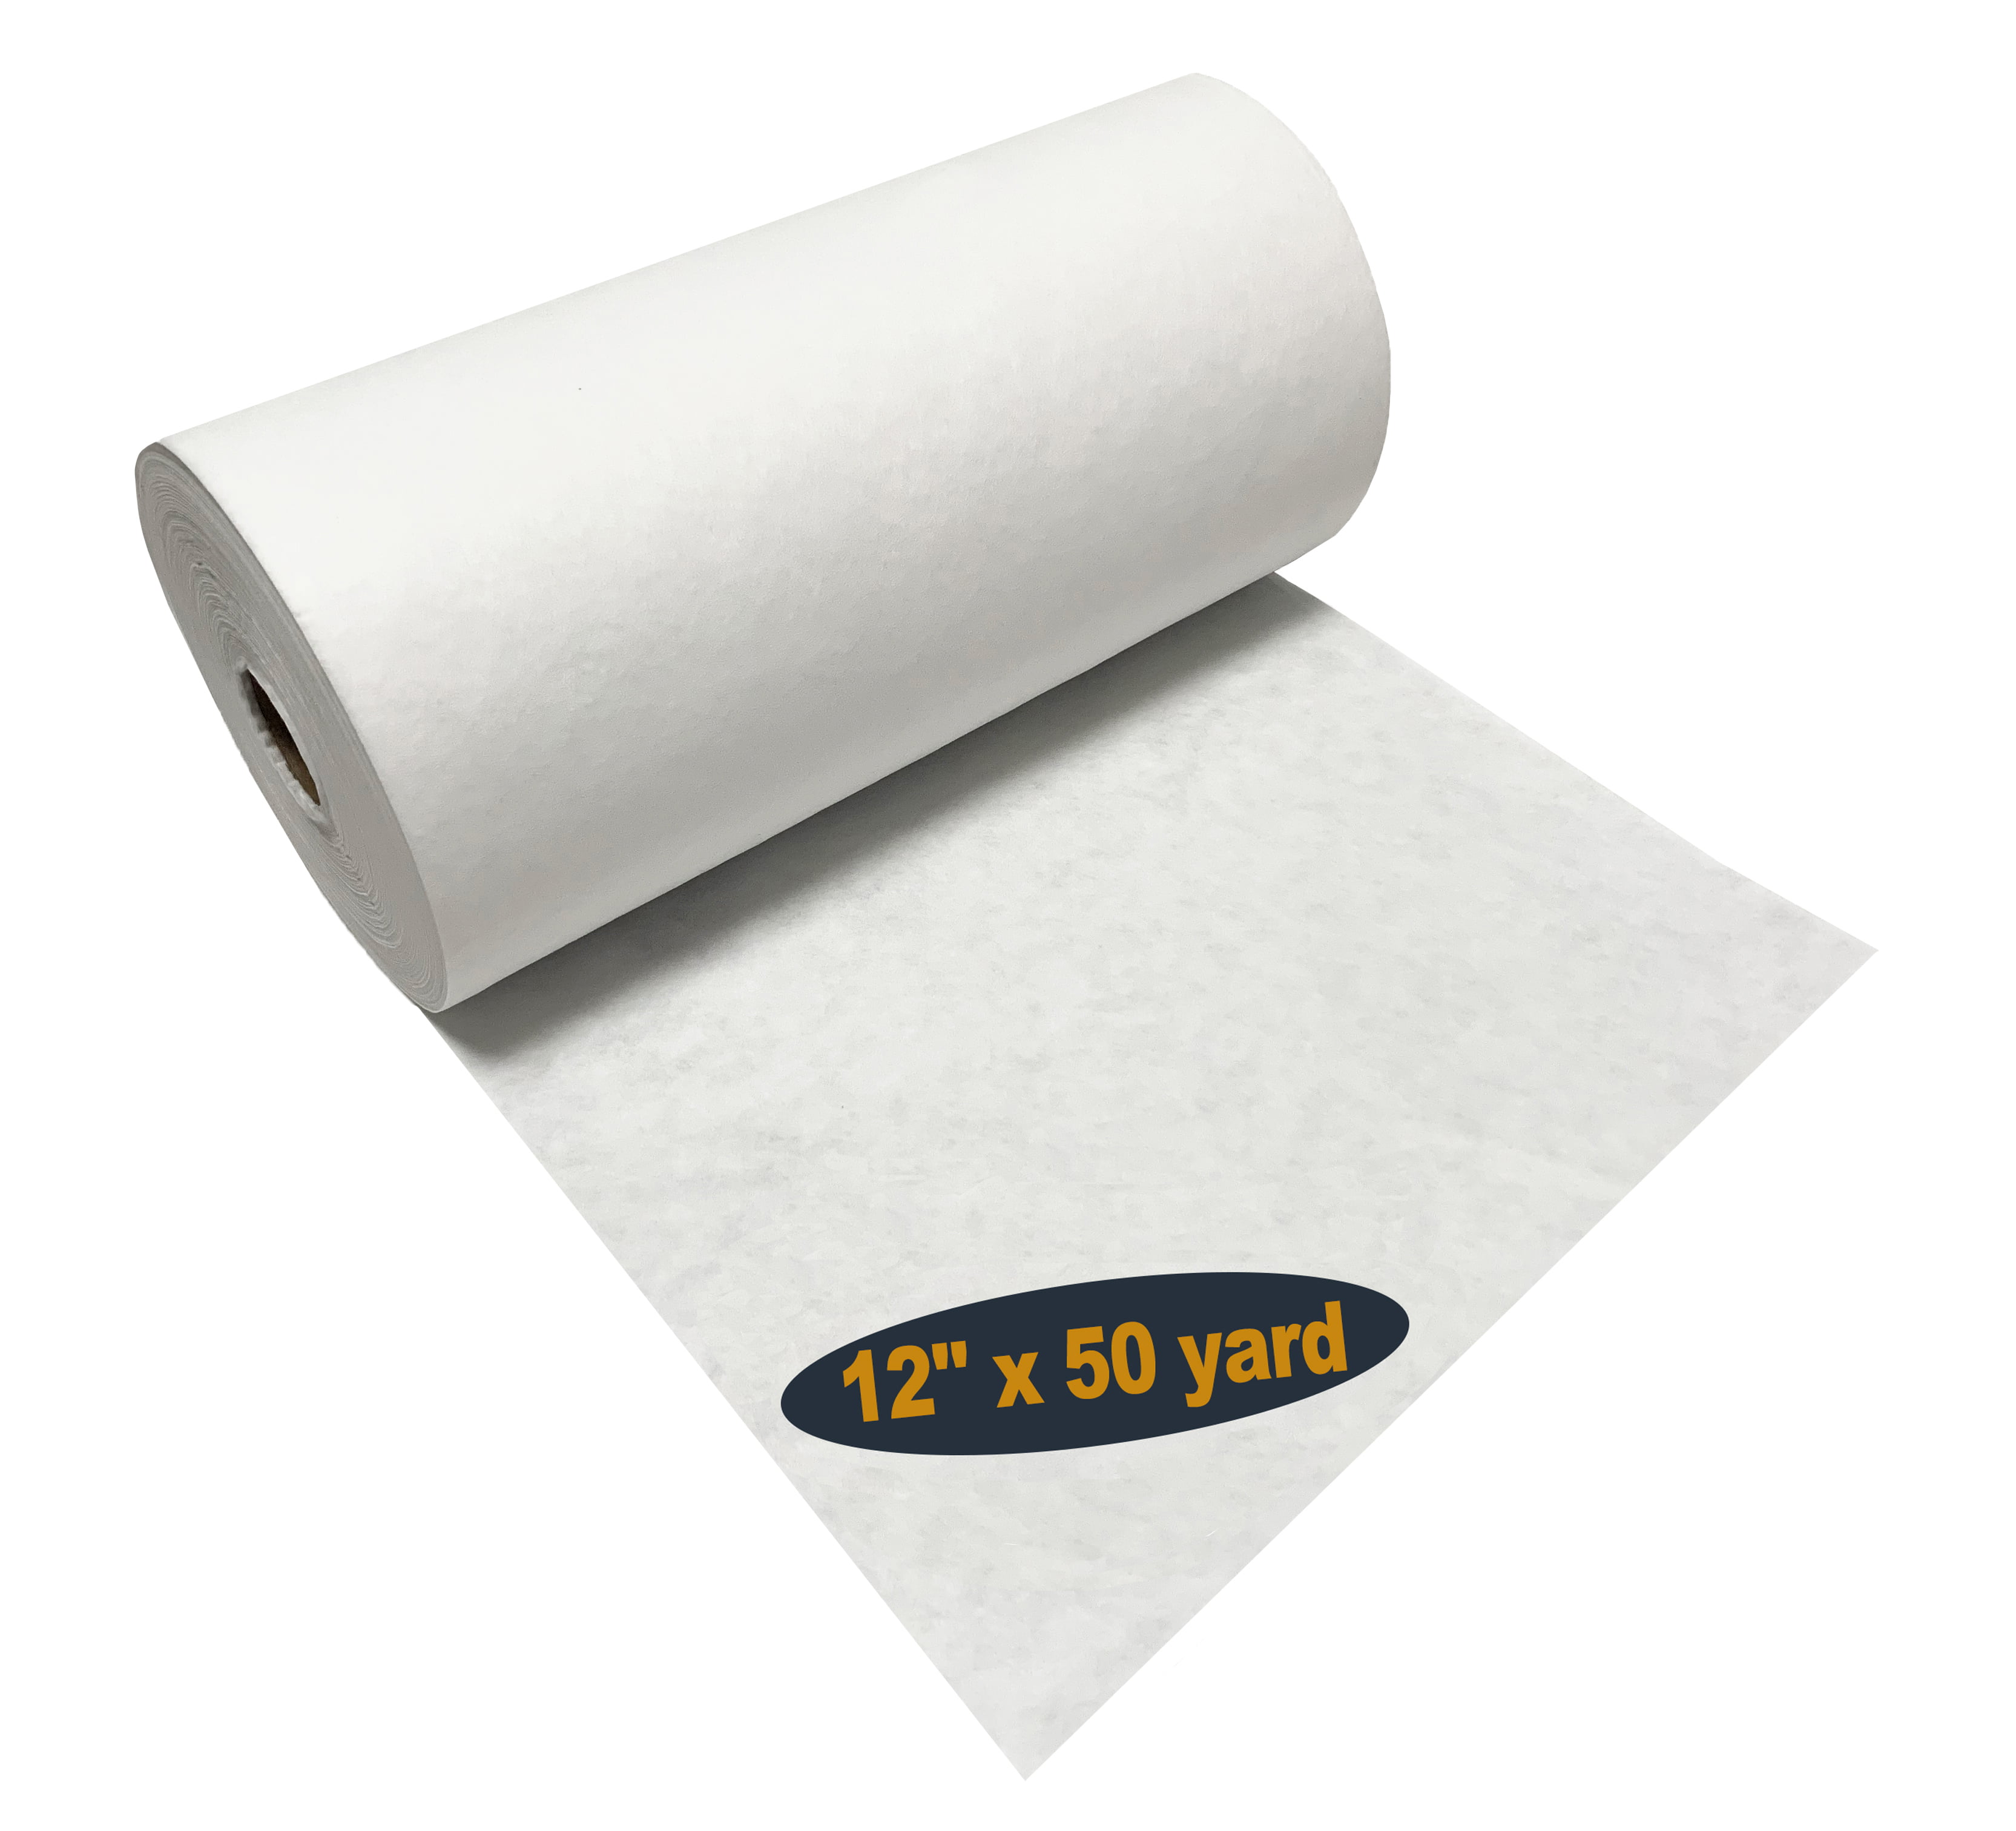 Regular Cutaway Embroidery Backing Stabilizer - 12 inch 50 yd rollDefault  Title